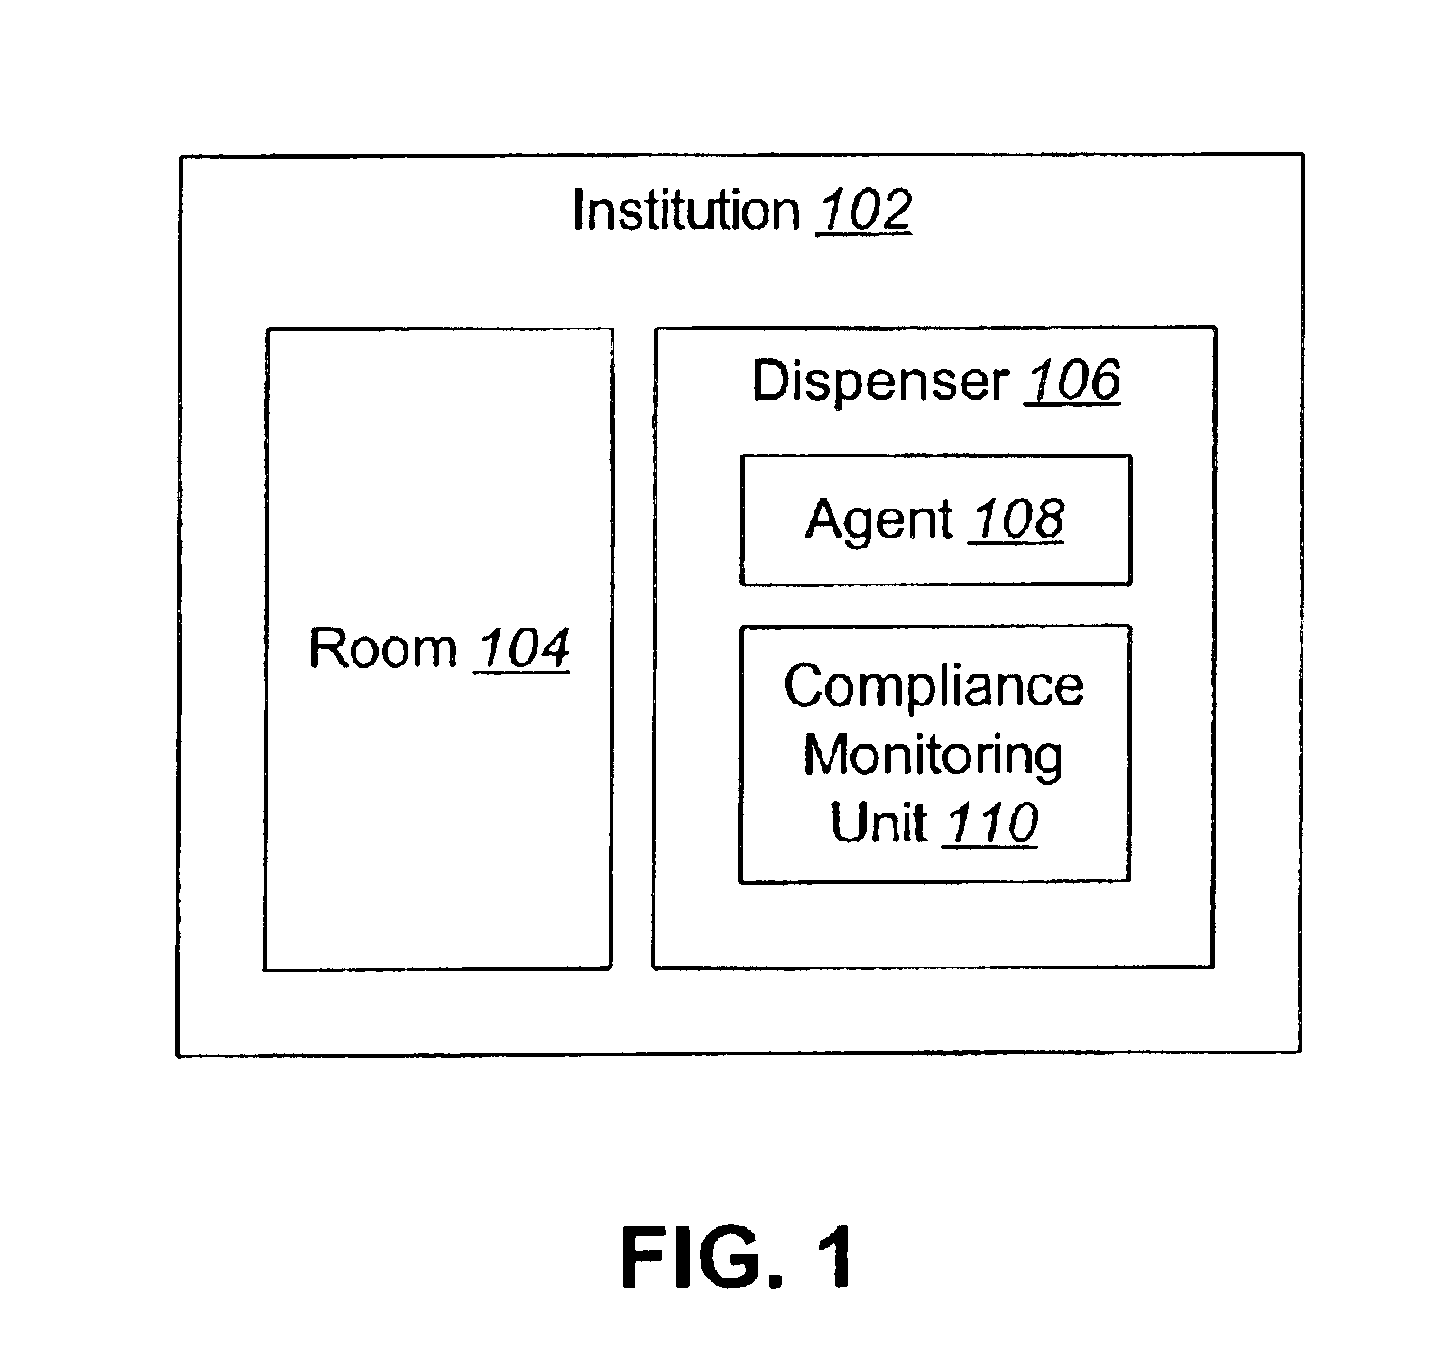 Apparatus and methods for monitoring compliance with recommended hand-washing practices